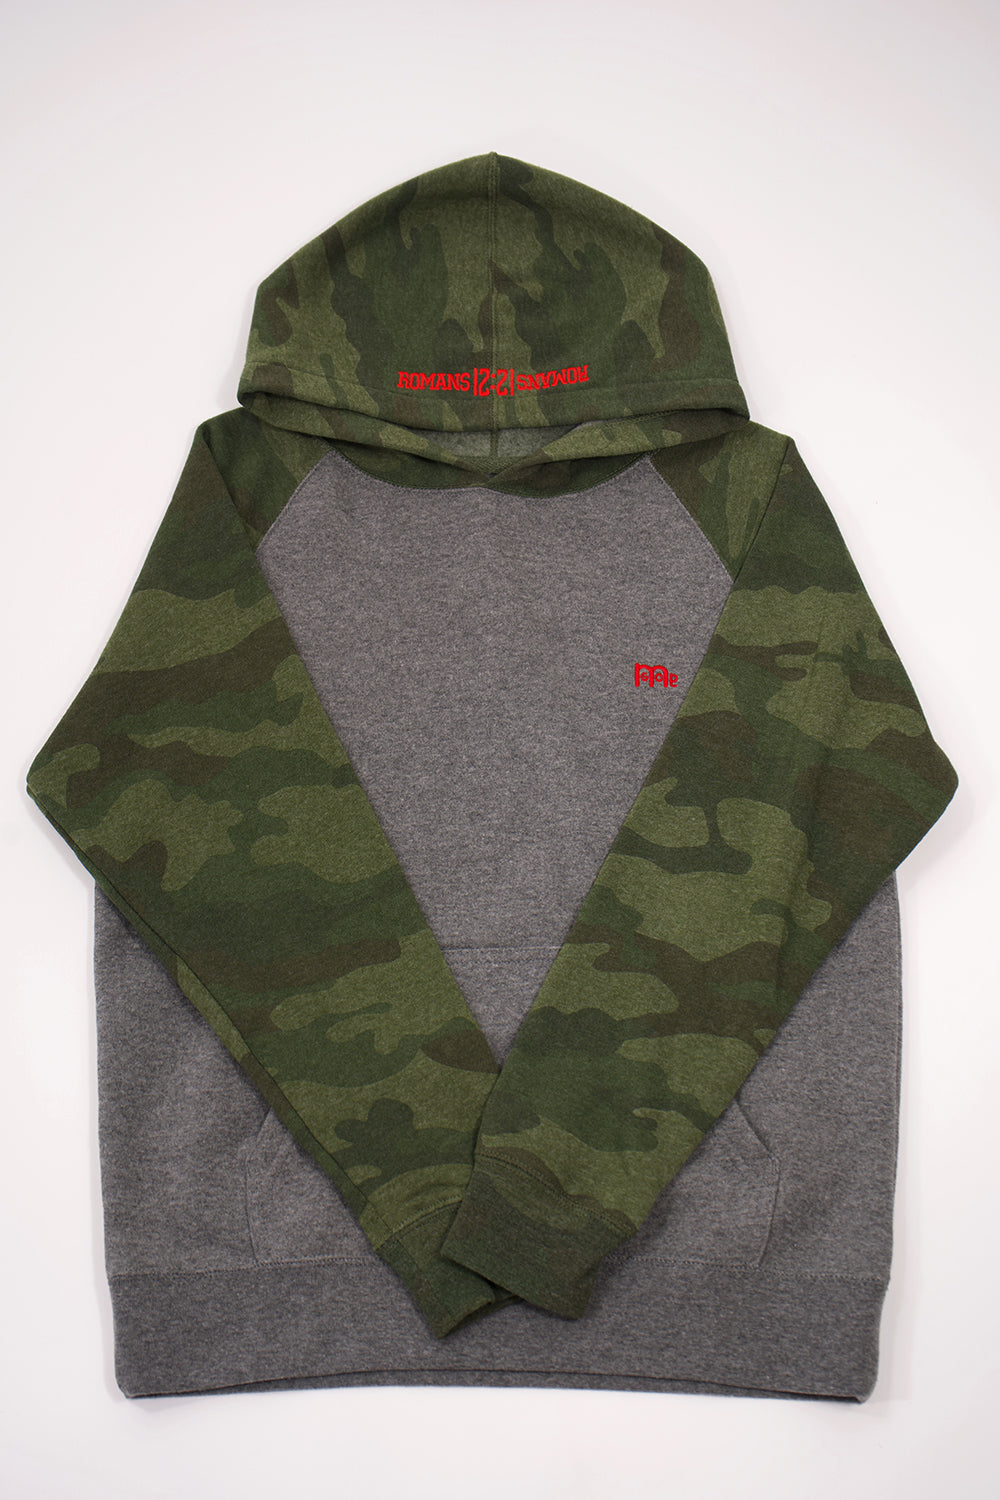 Youth Hoodie light Grey body with Green Camouflage hood and sleeves. Red logo at left chest and Romans 12 : 21 on hood. Sizes 6 to 16